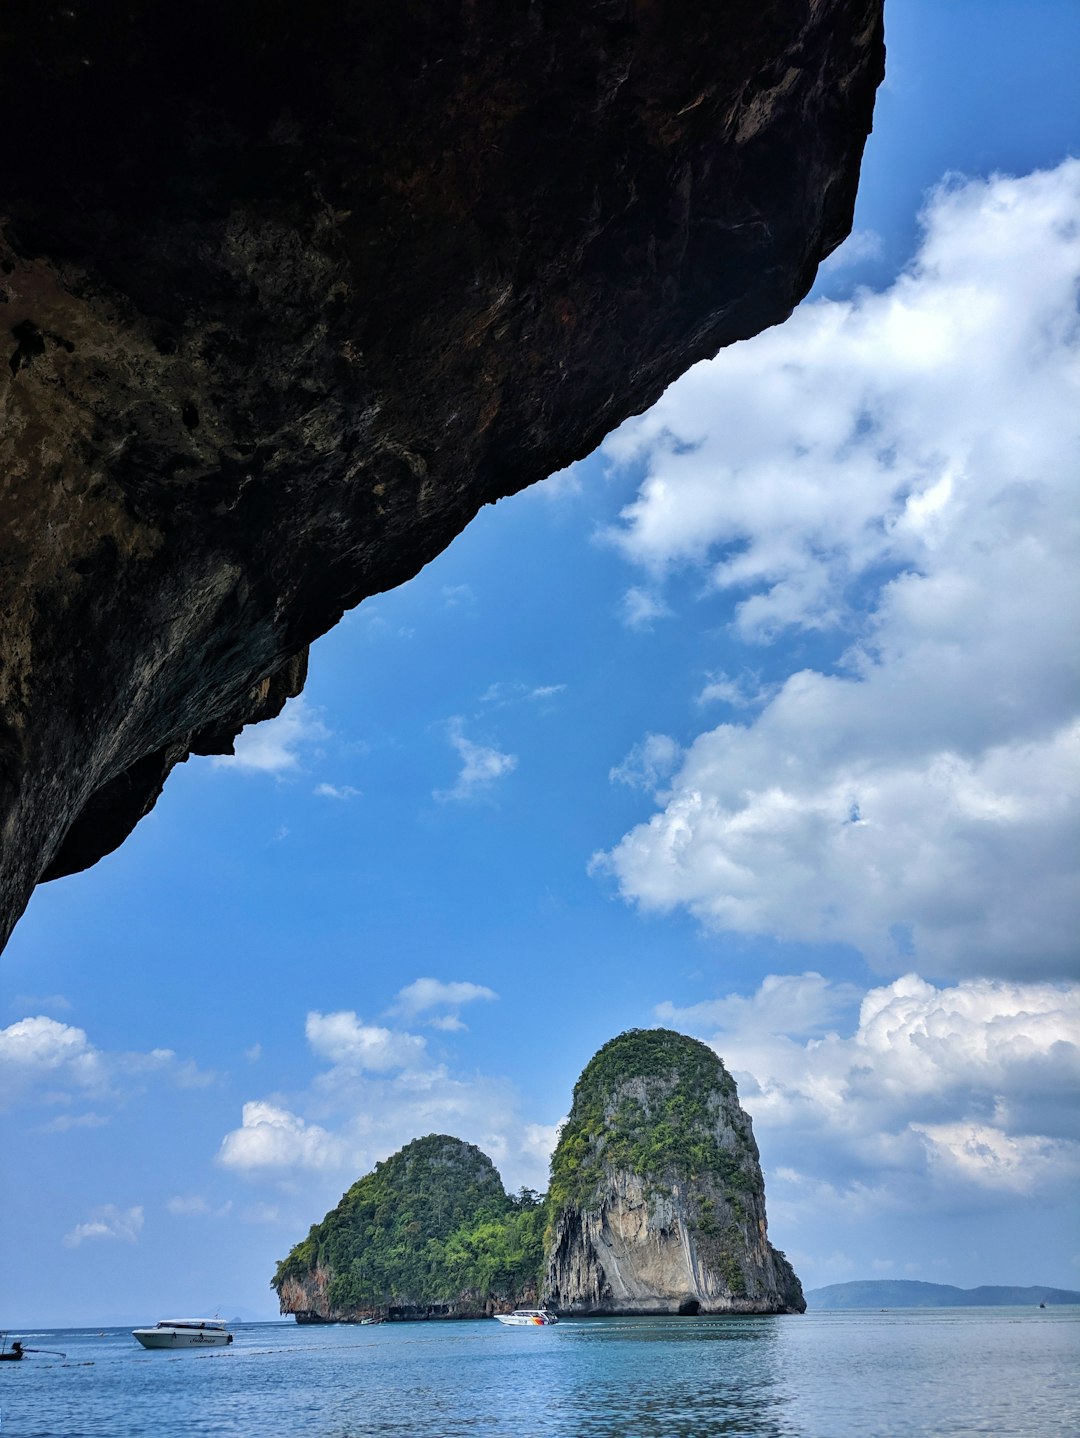 travelers stories about Natural arch in Phra nang Cave Beach, Thailand